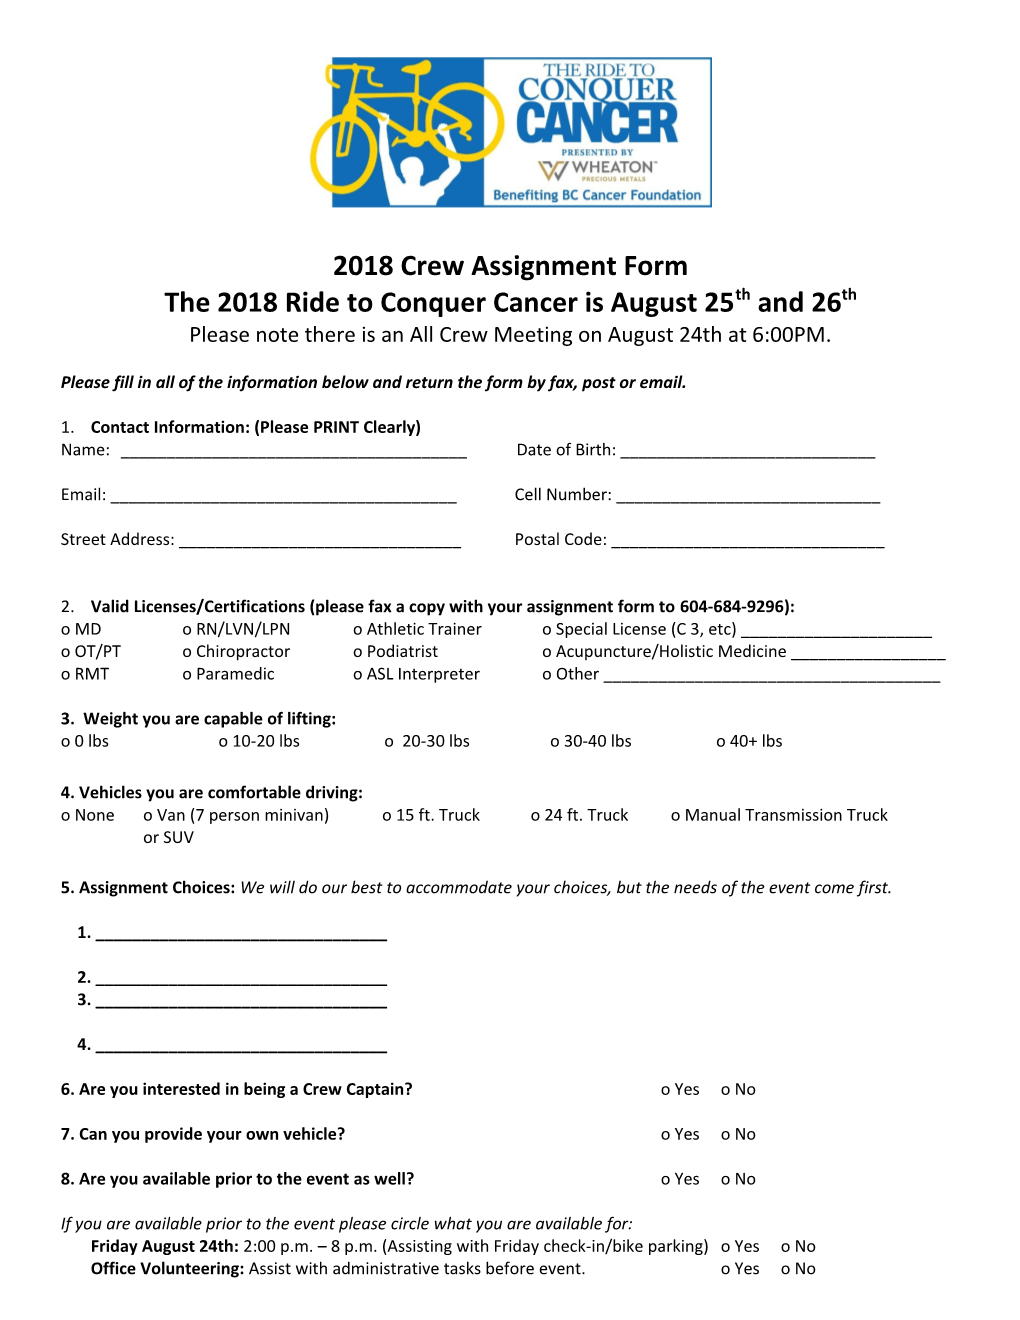 2018 Crew Assignment Form